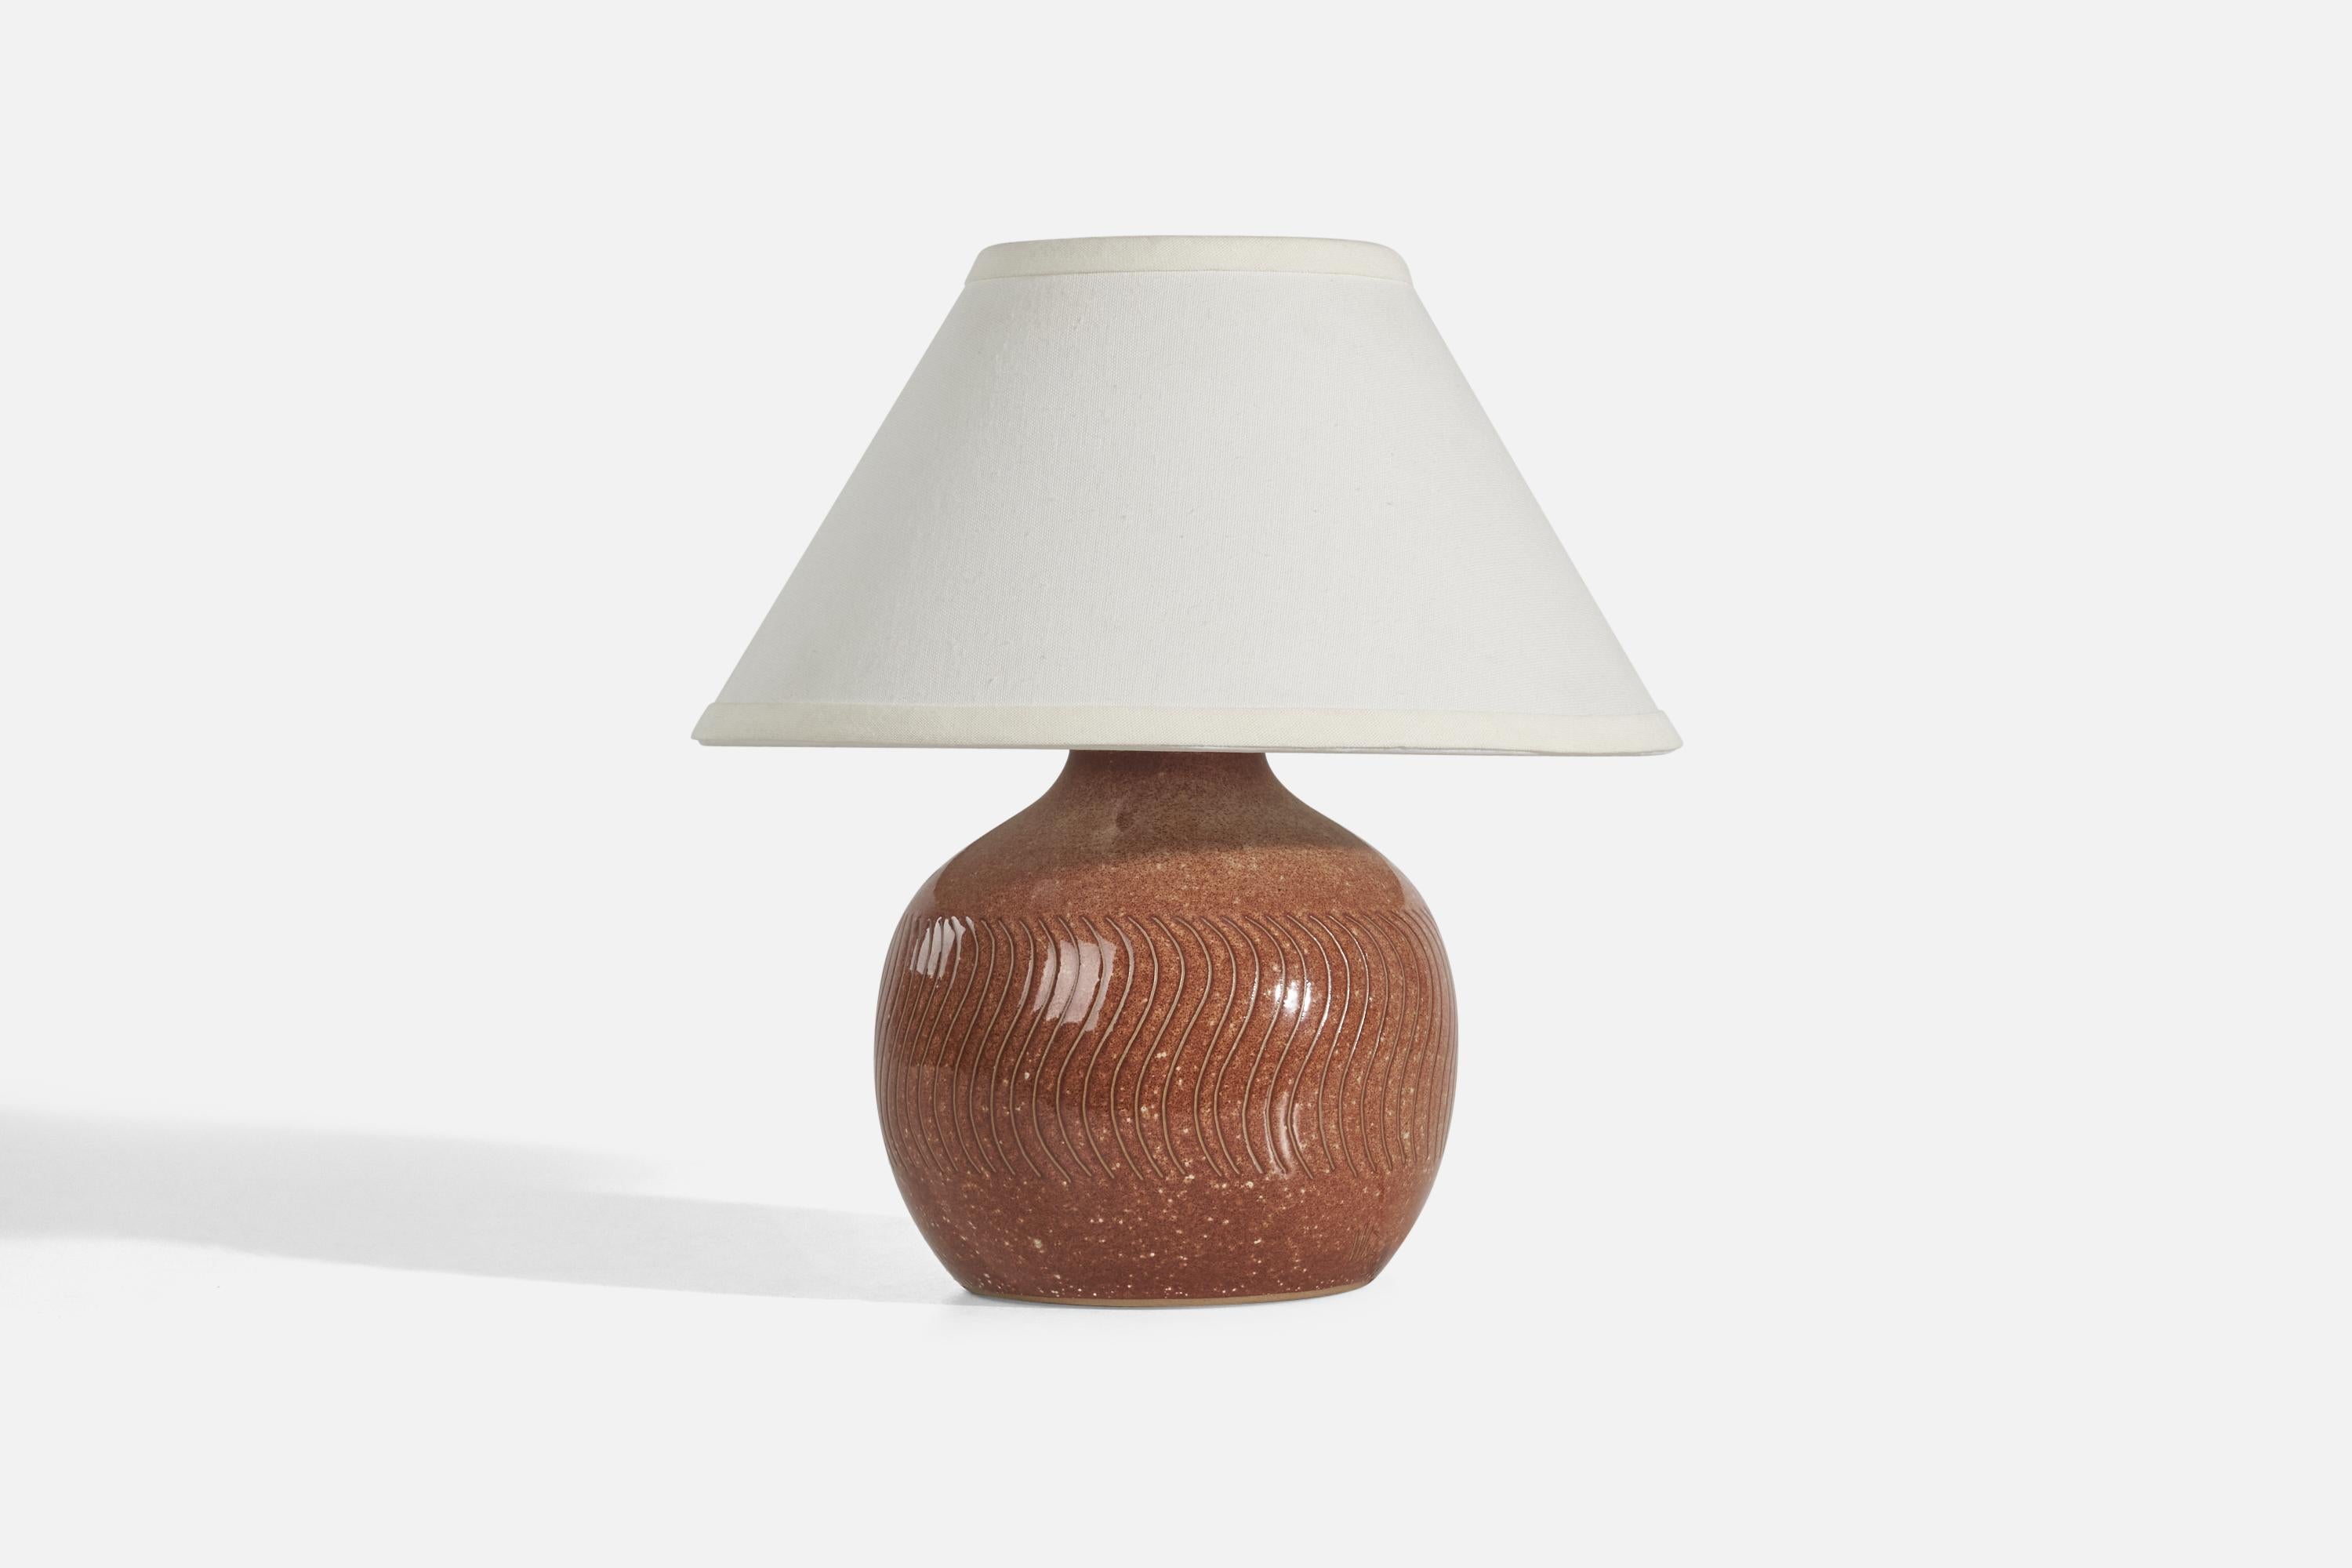 A brown table lamp designed by Jane & Gordon Martz and produced by Marshall Studios, Indianapolis, 1950s. 

Sold without Lampshade
Dimensions of Lamp (inches) : 9.75 x 7.18 x 7.18 (Height x Width x Depth)
Dimensions of Lampshade (inches) : 5 x 12 x